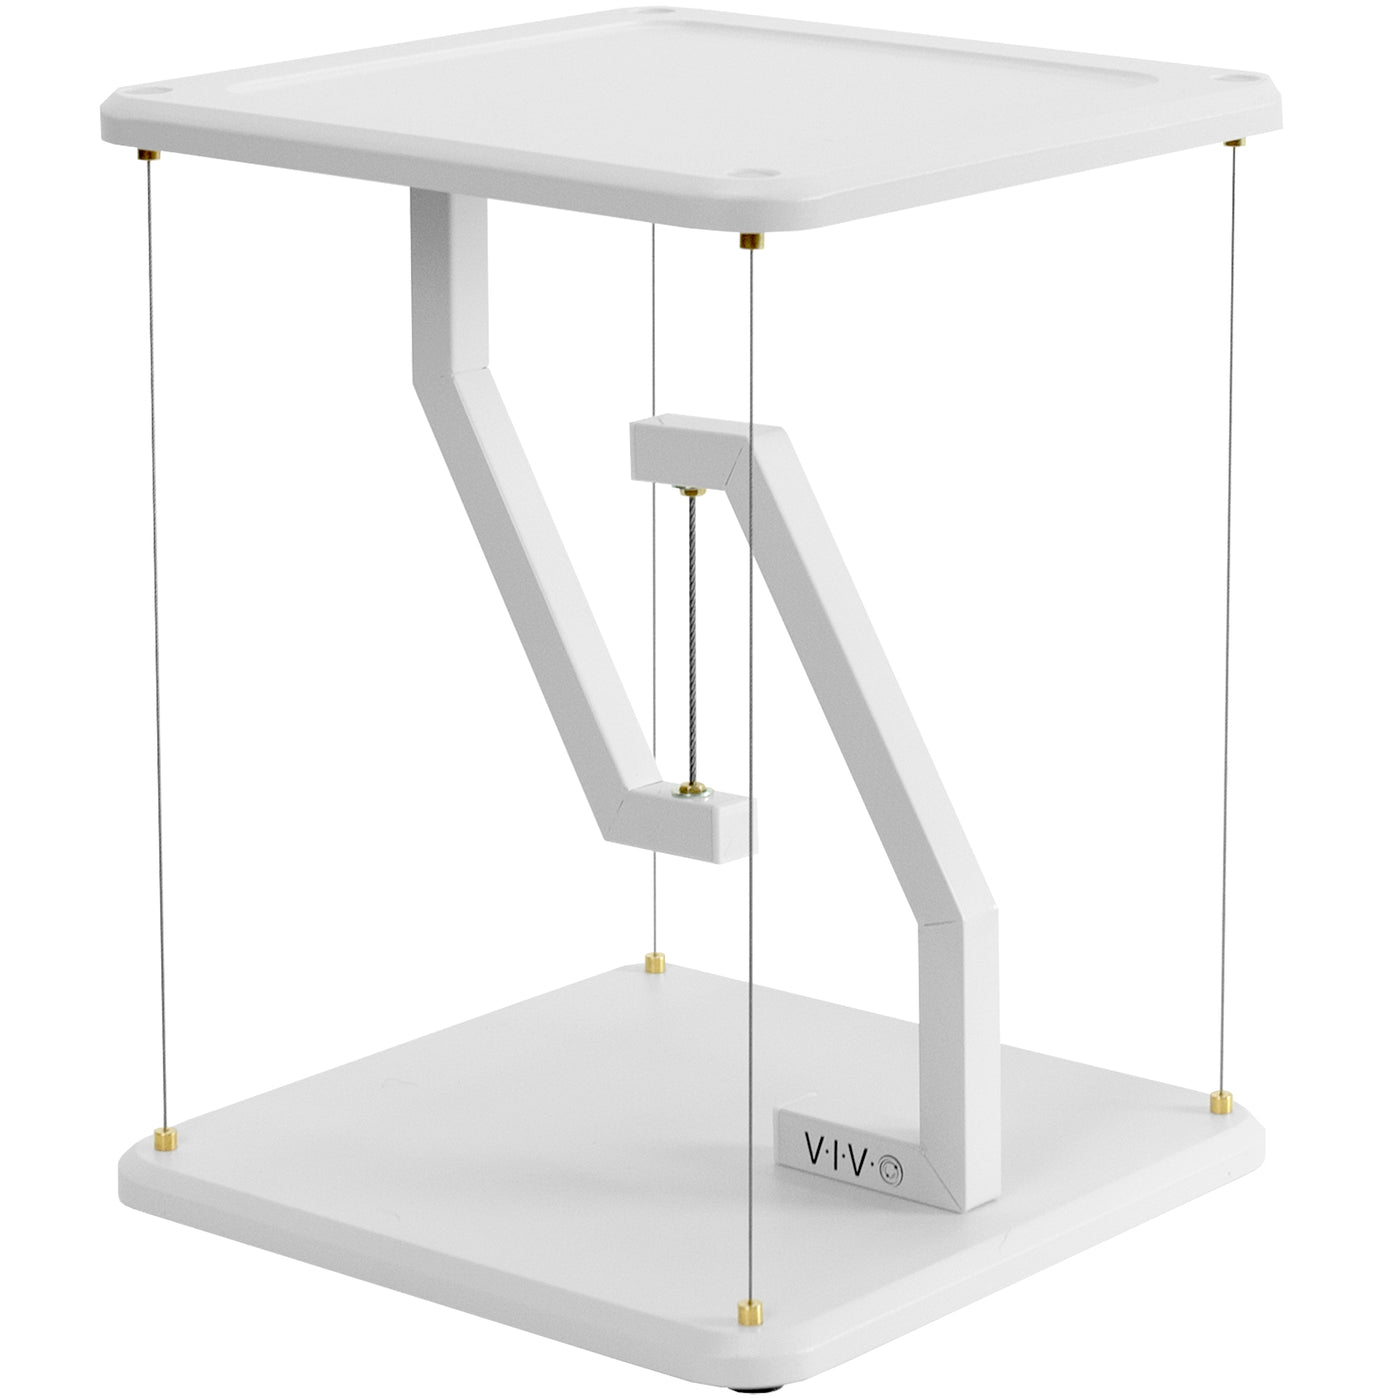 Modern tensegrity anti-gravity floating speaker stand for improved sound and display.